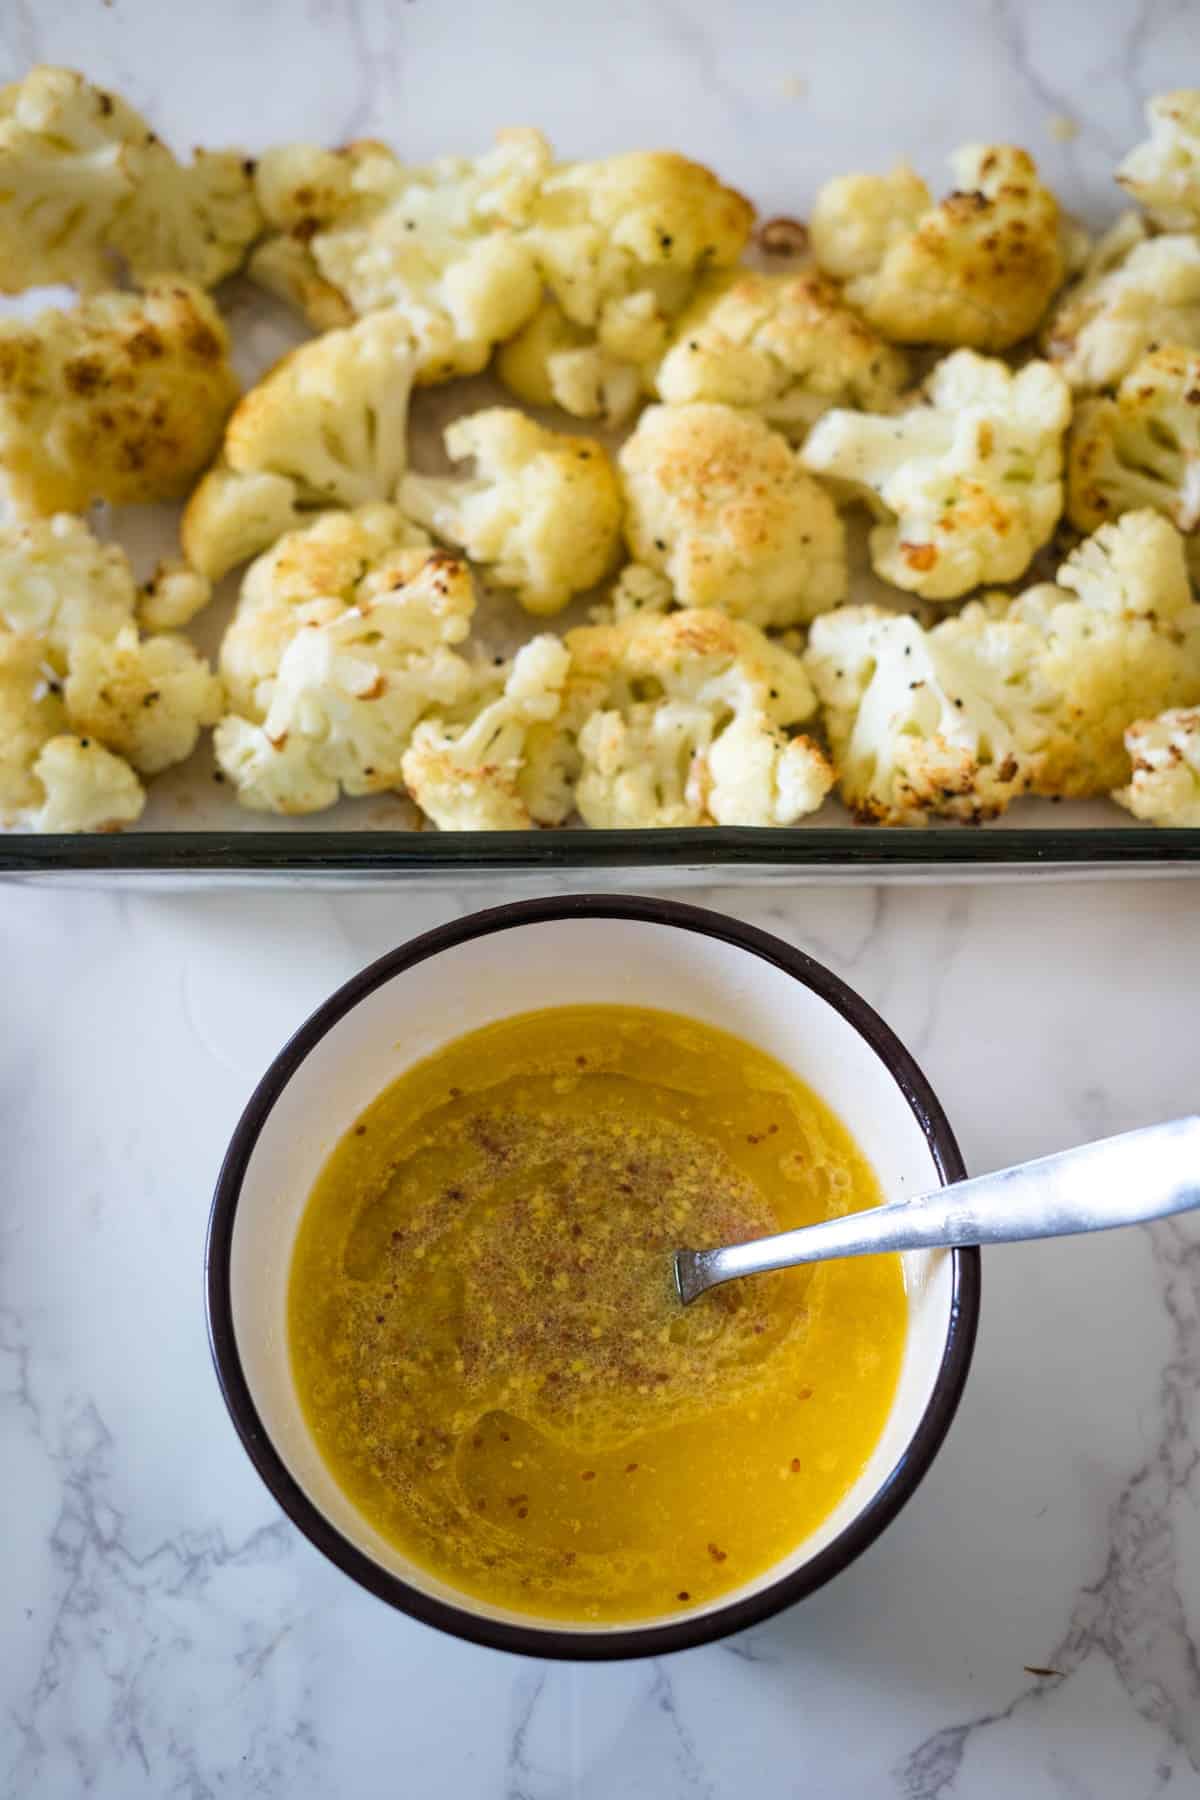 A bowl of yellow sauce with a spoon, next to a tray of keto roasted cauliflower on a marble countertop.